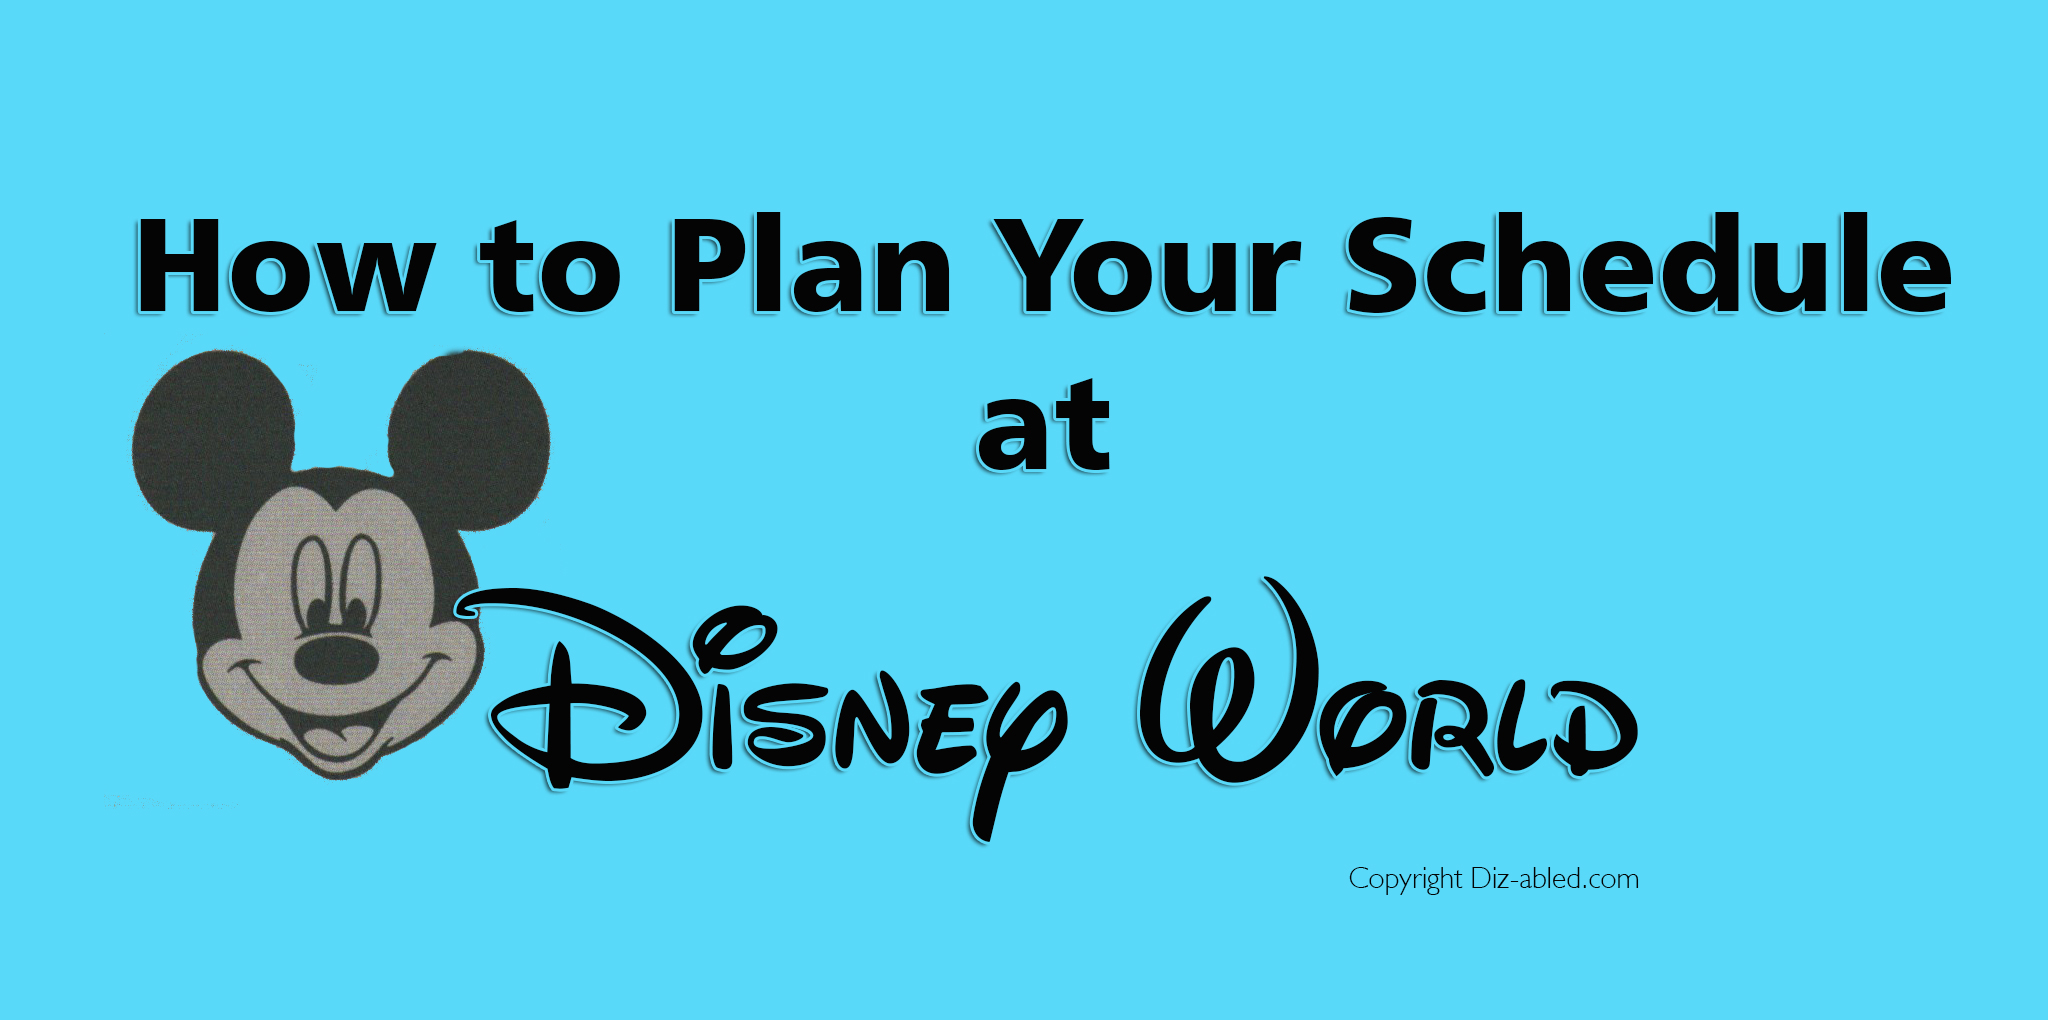 How to Plan Your Daily Schedule at Disney World - Step by Step